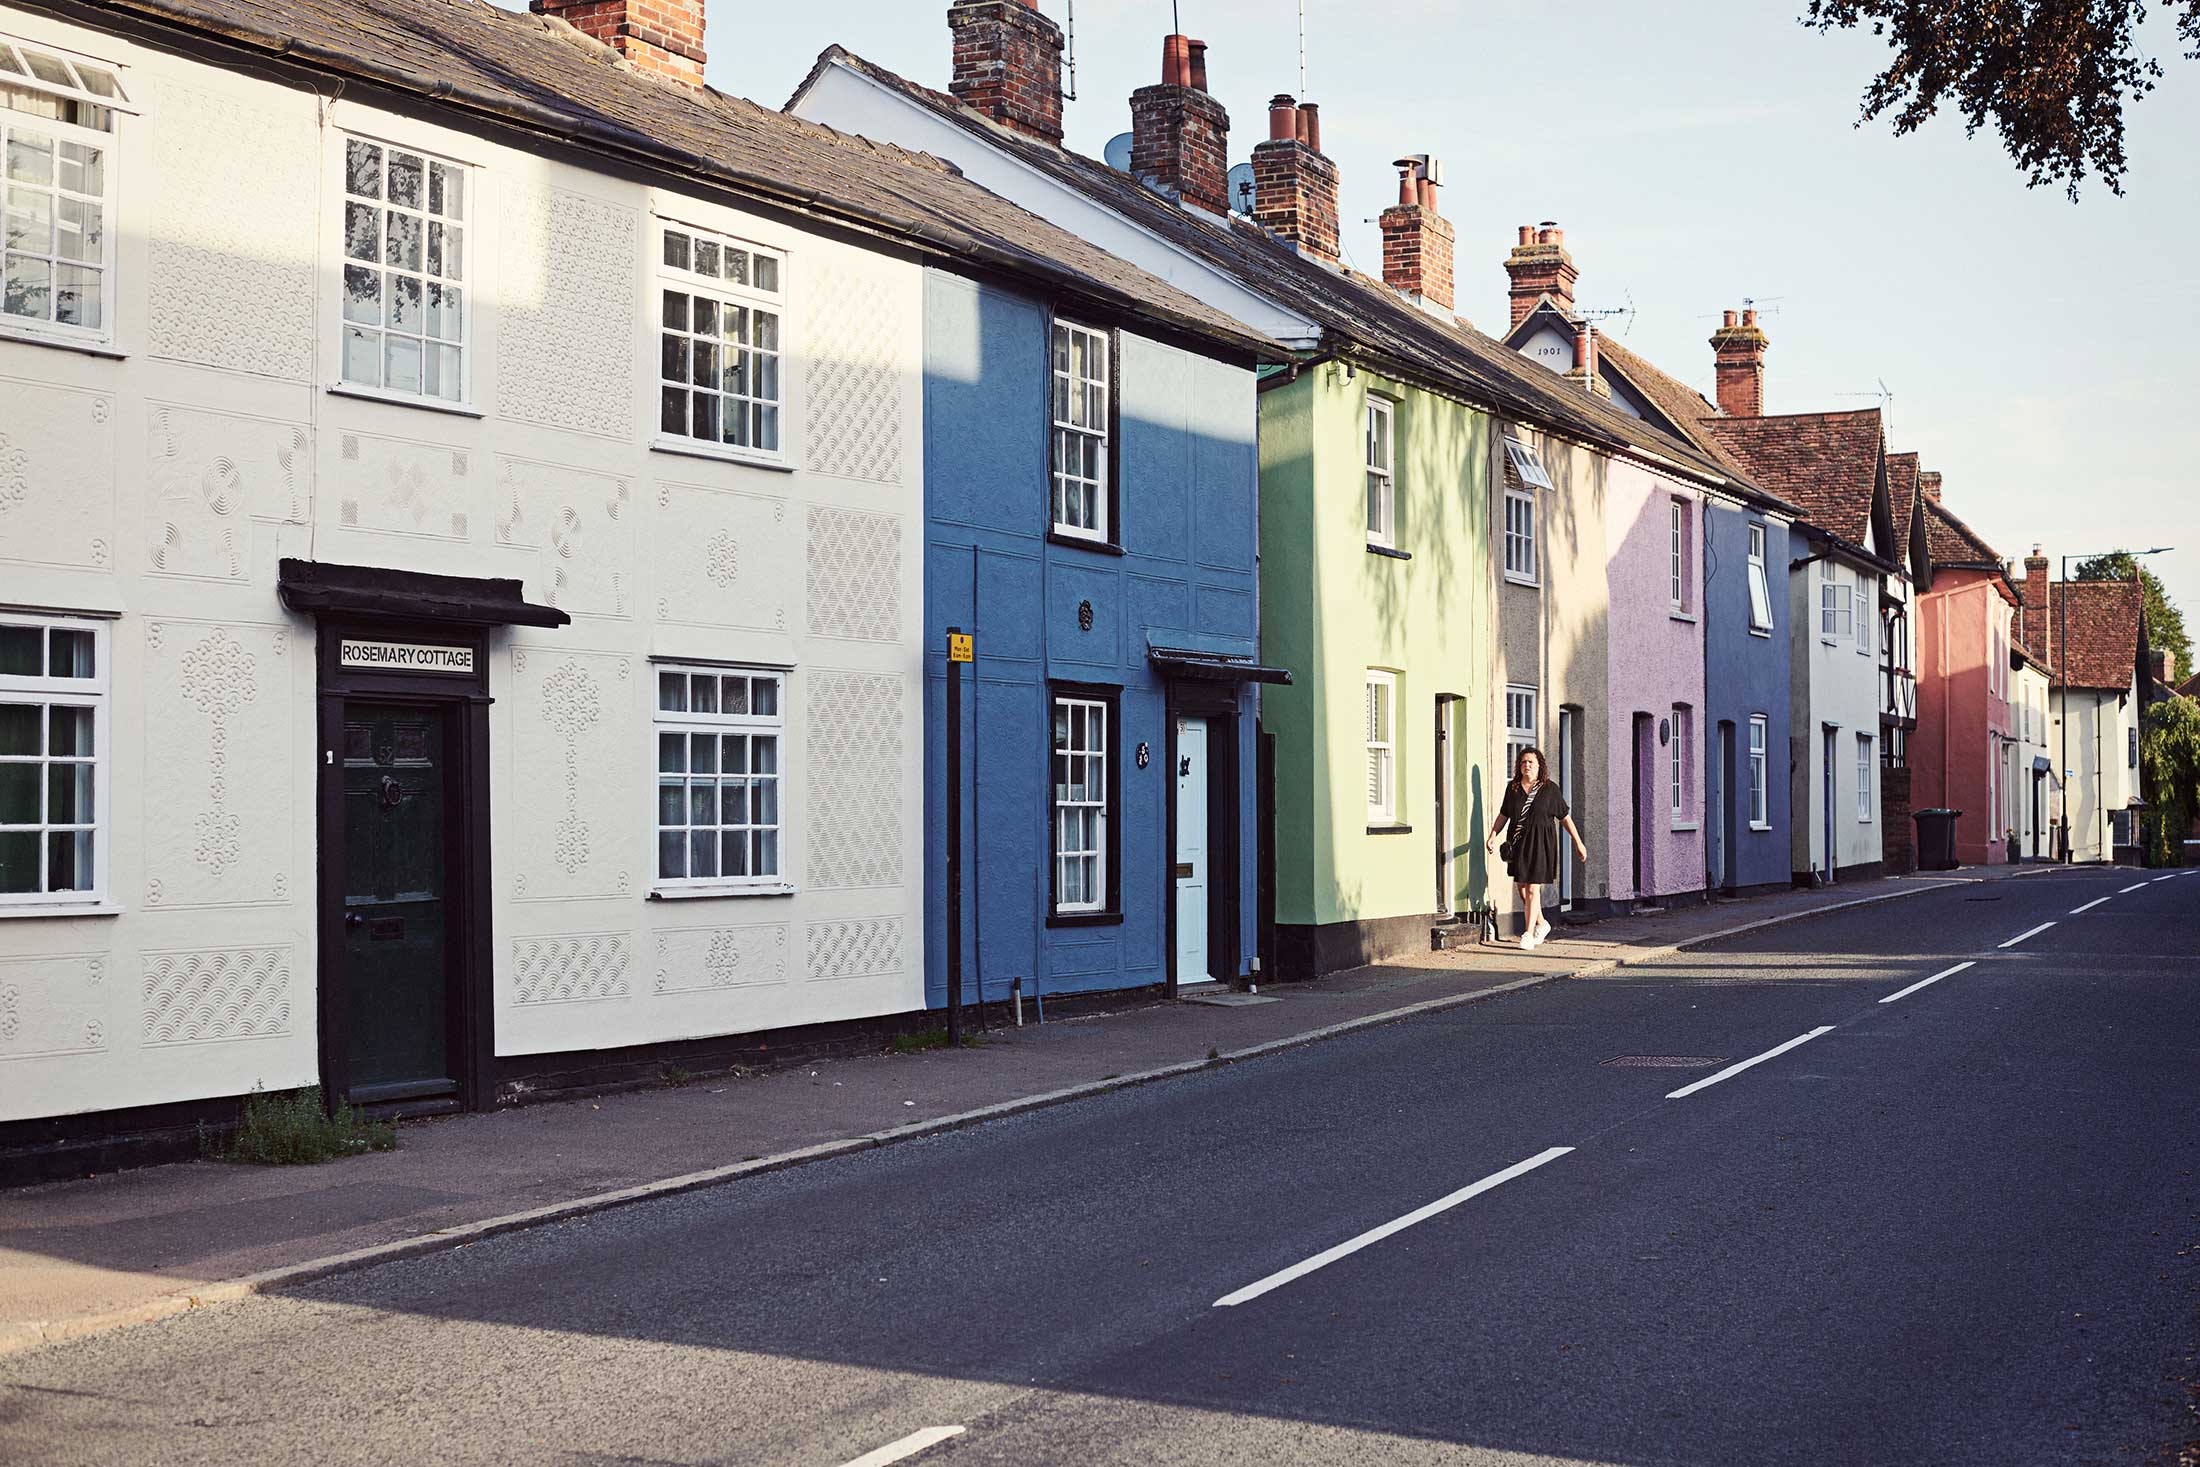 Colourful row of houses - Chelmsford - Beresfords Estate agents - Essex